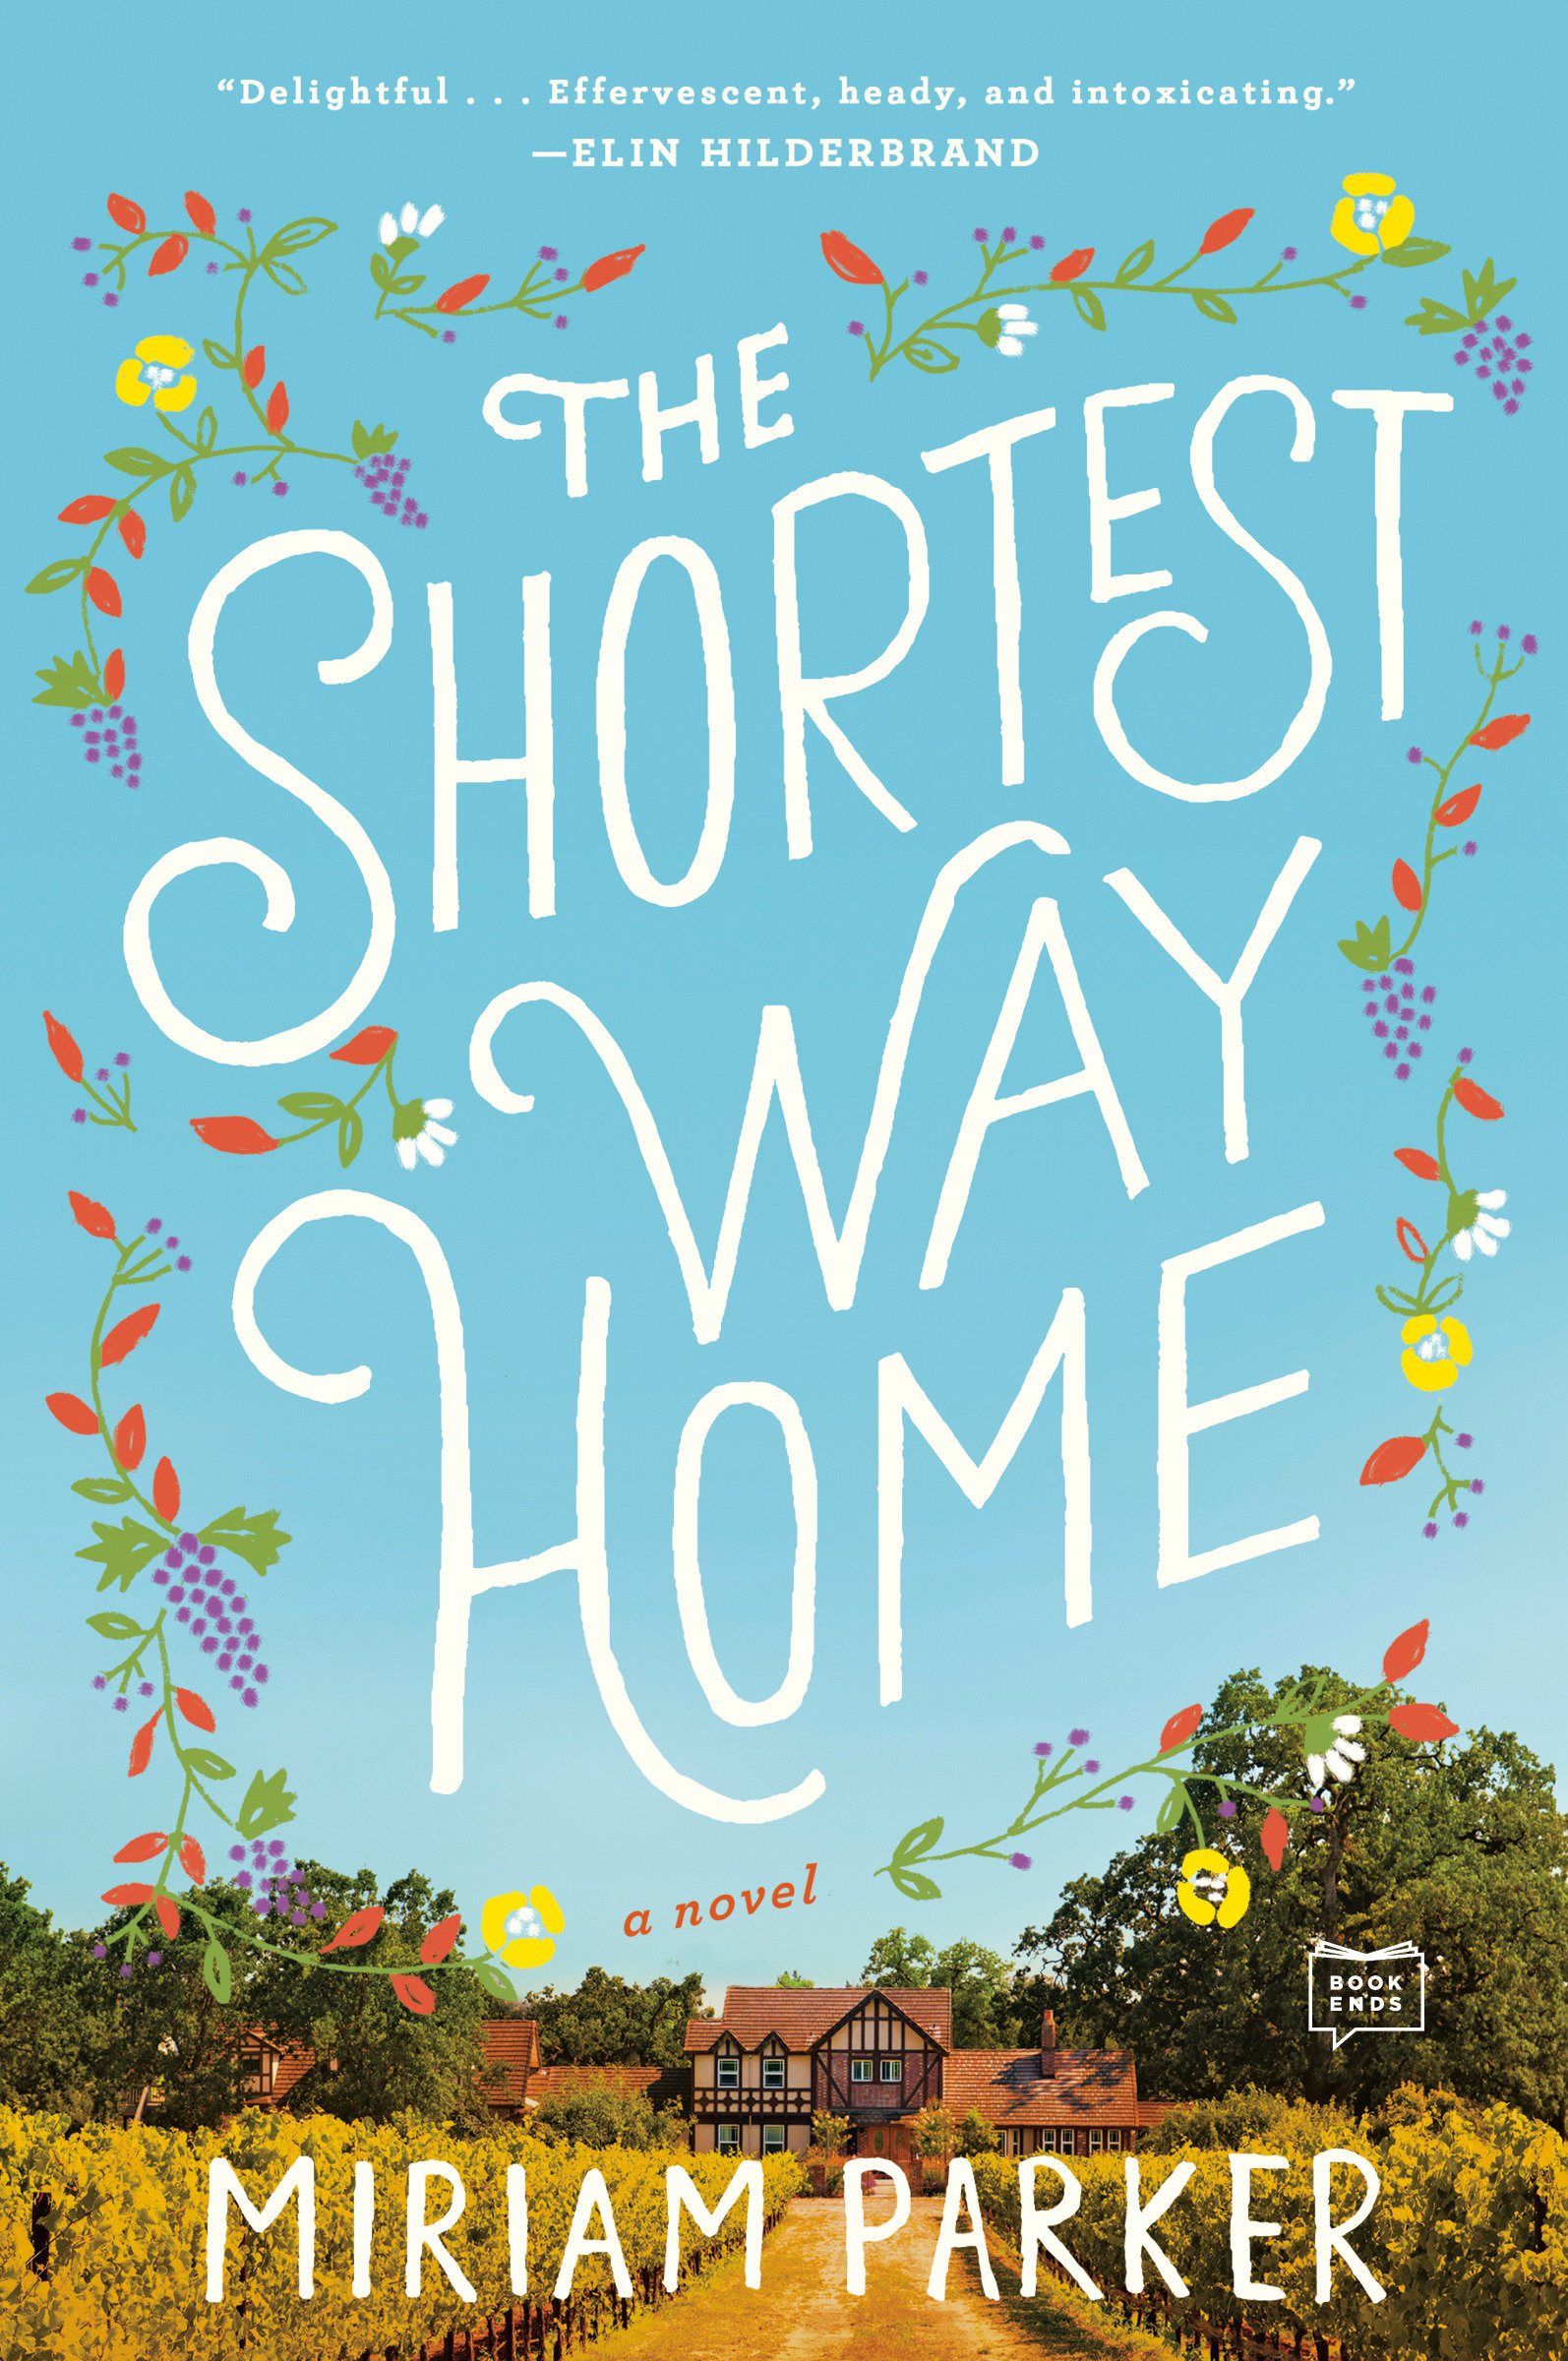 The shortest way home cover image